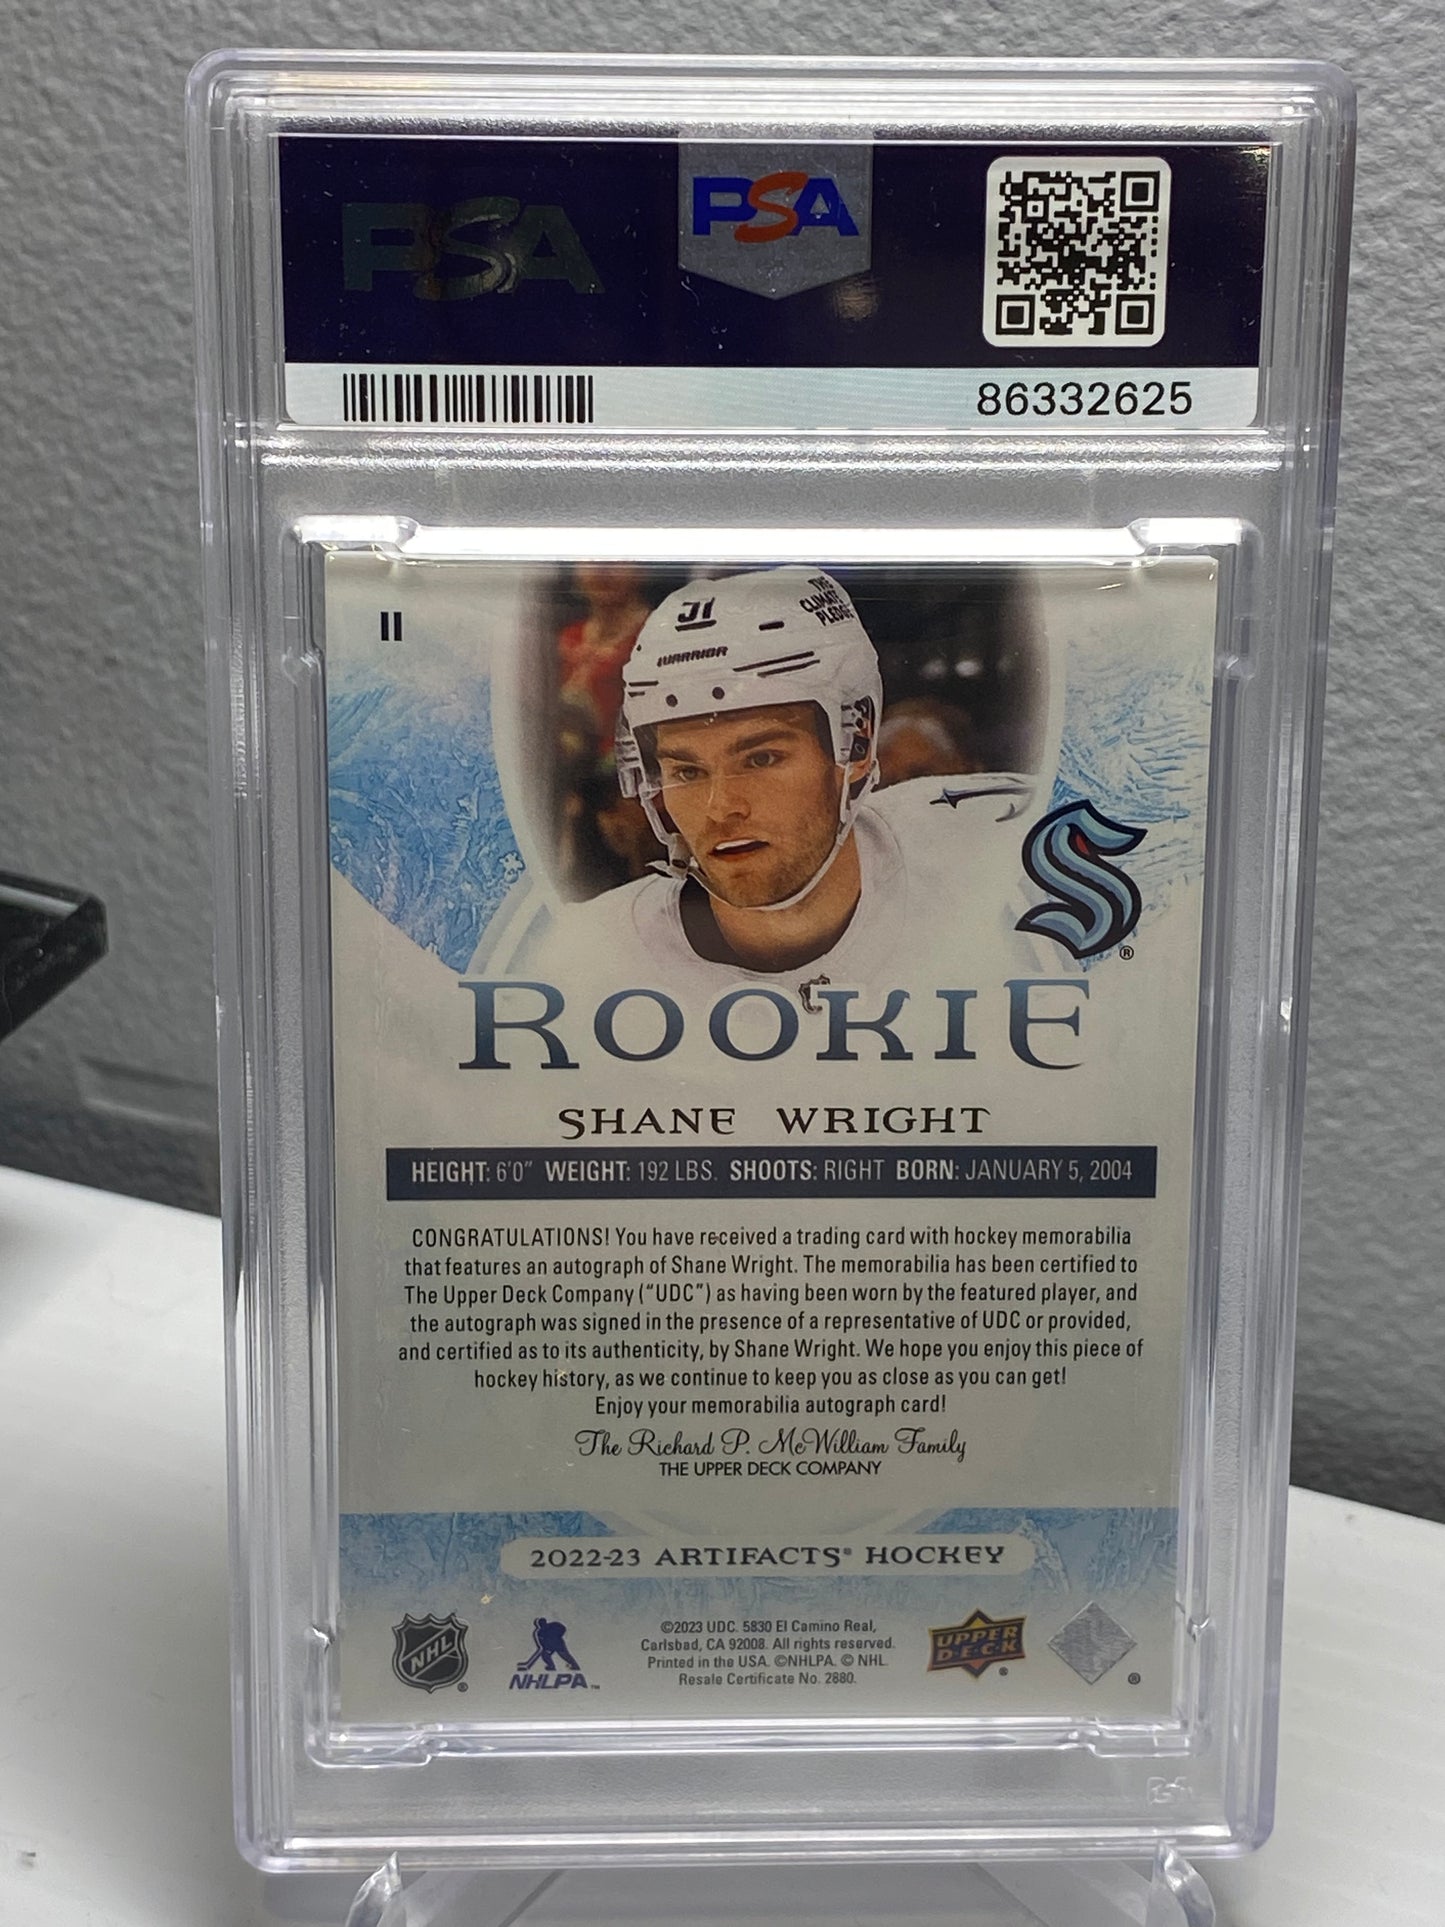 2022-23 Upper Deck Artifacts Emerald Dual Patch Rookie Auto Shane Wright /15 PSA 8